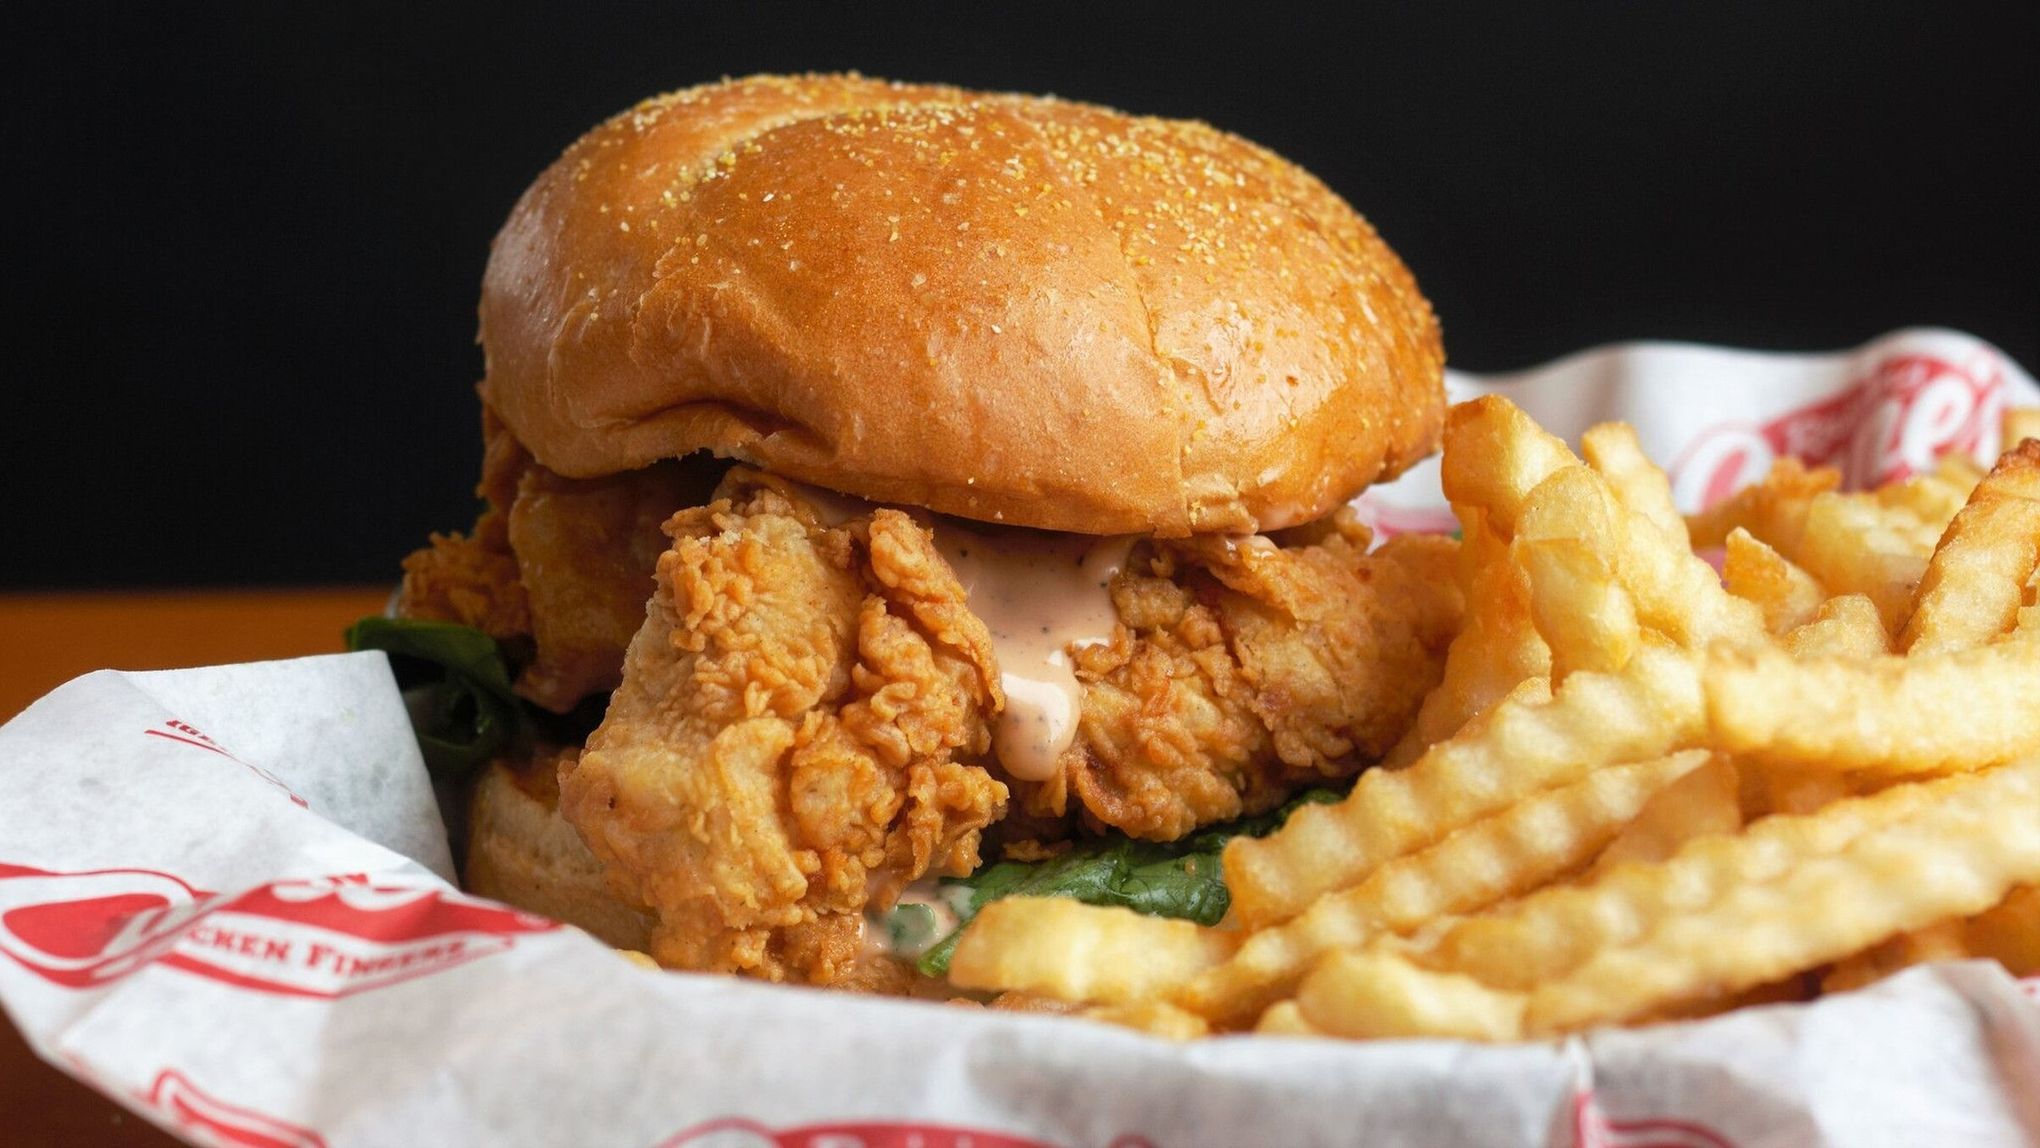 Second Raising Cane's location planned for Seattle area - Puget